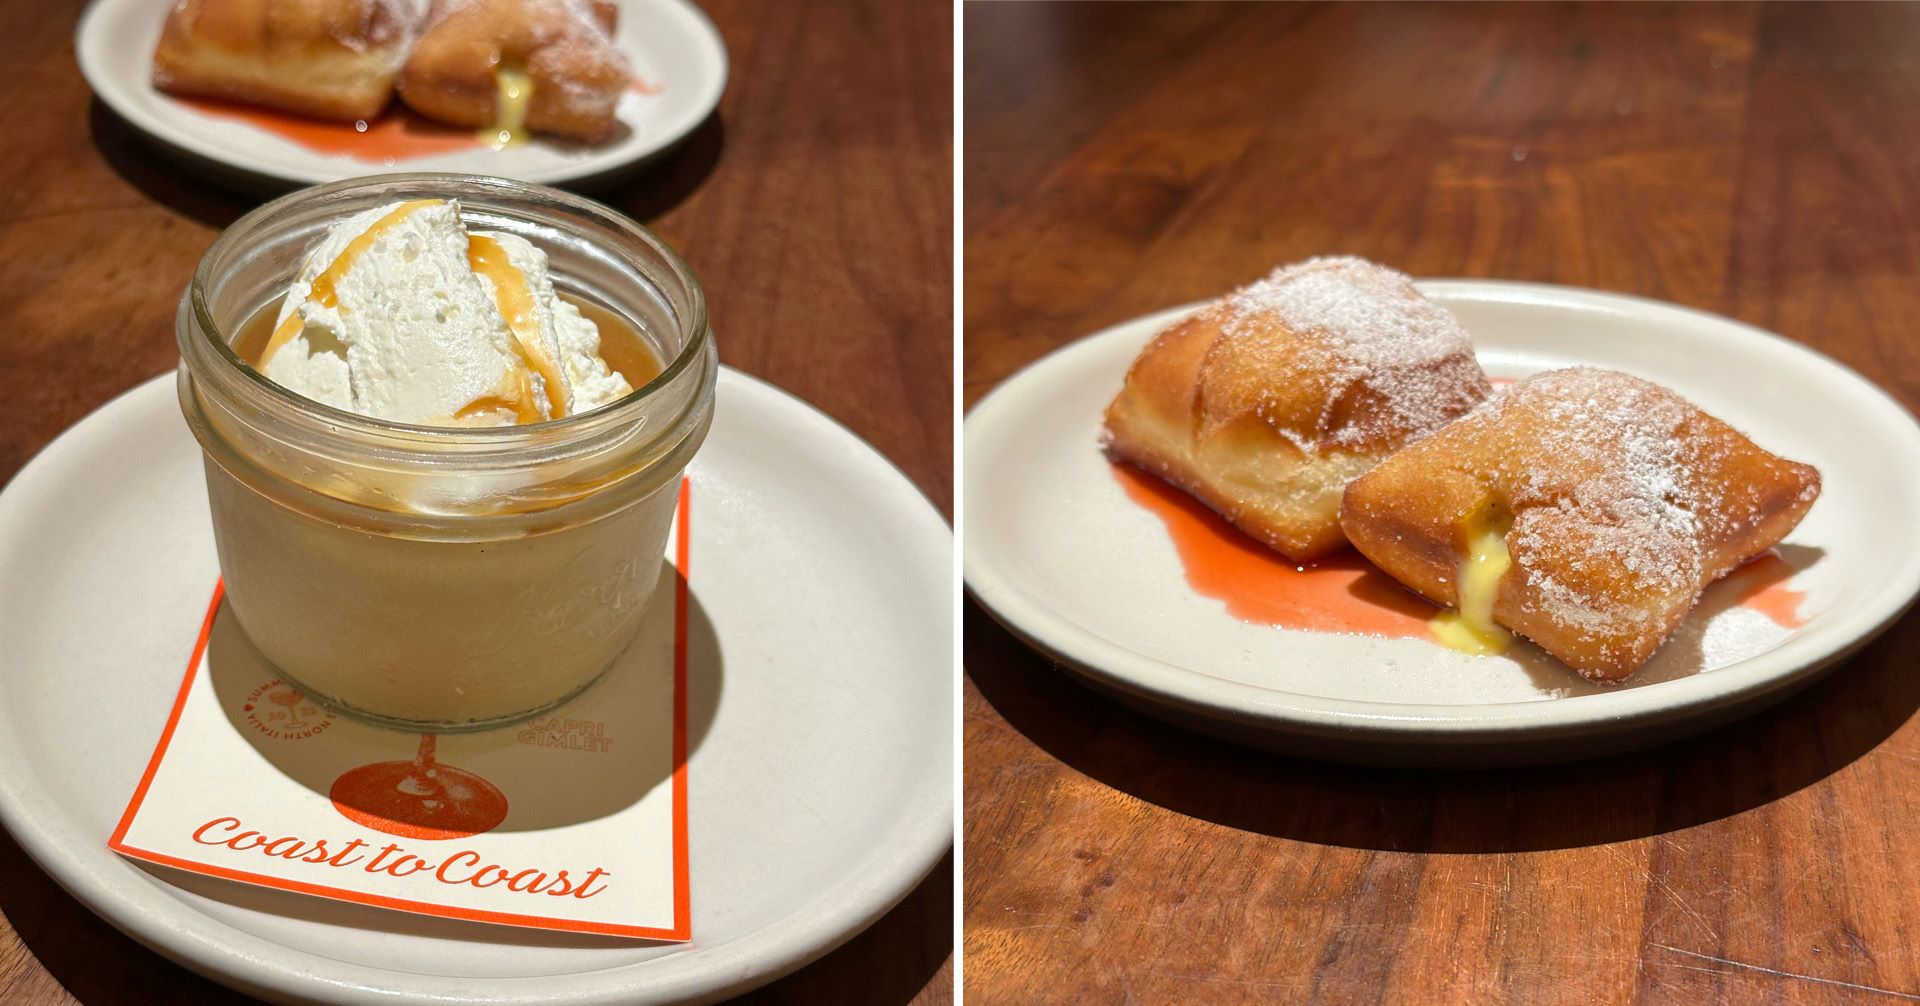 An image of the Salted Caramel Budino and irresistible Italian Donuts.